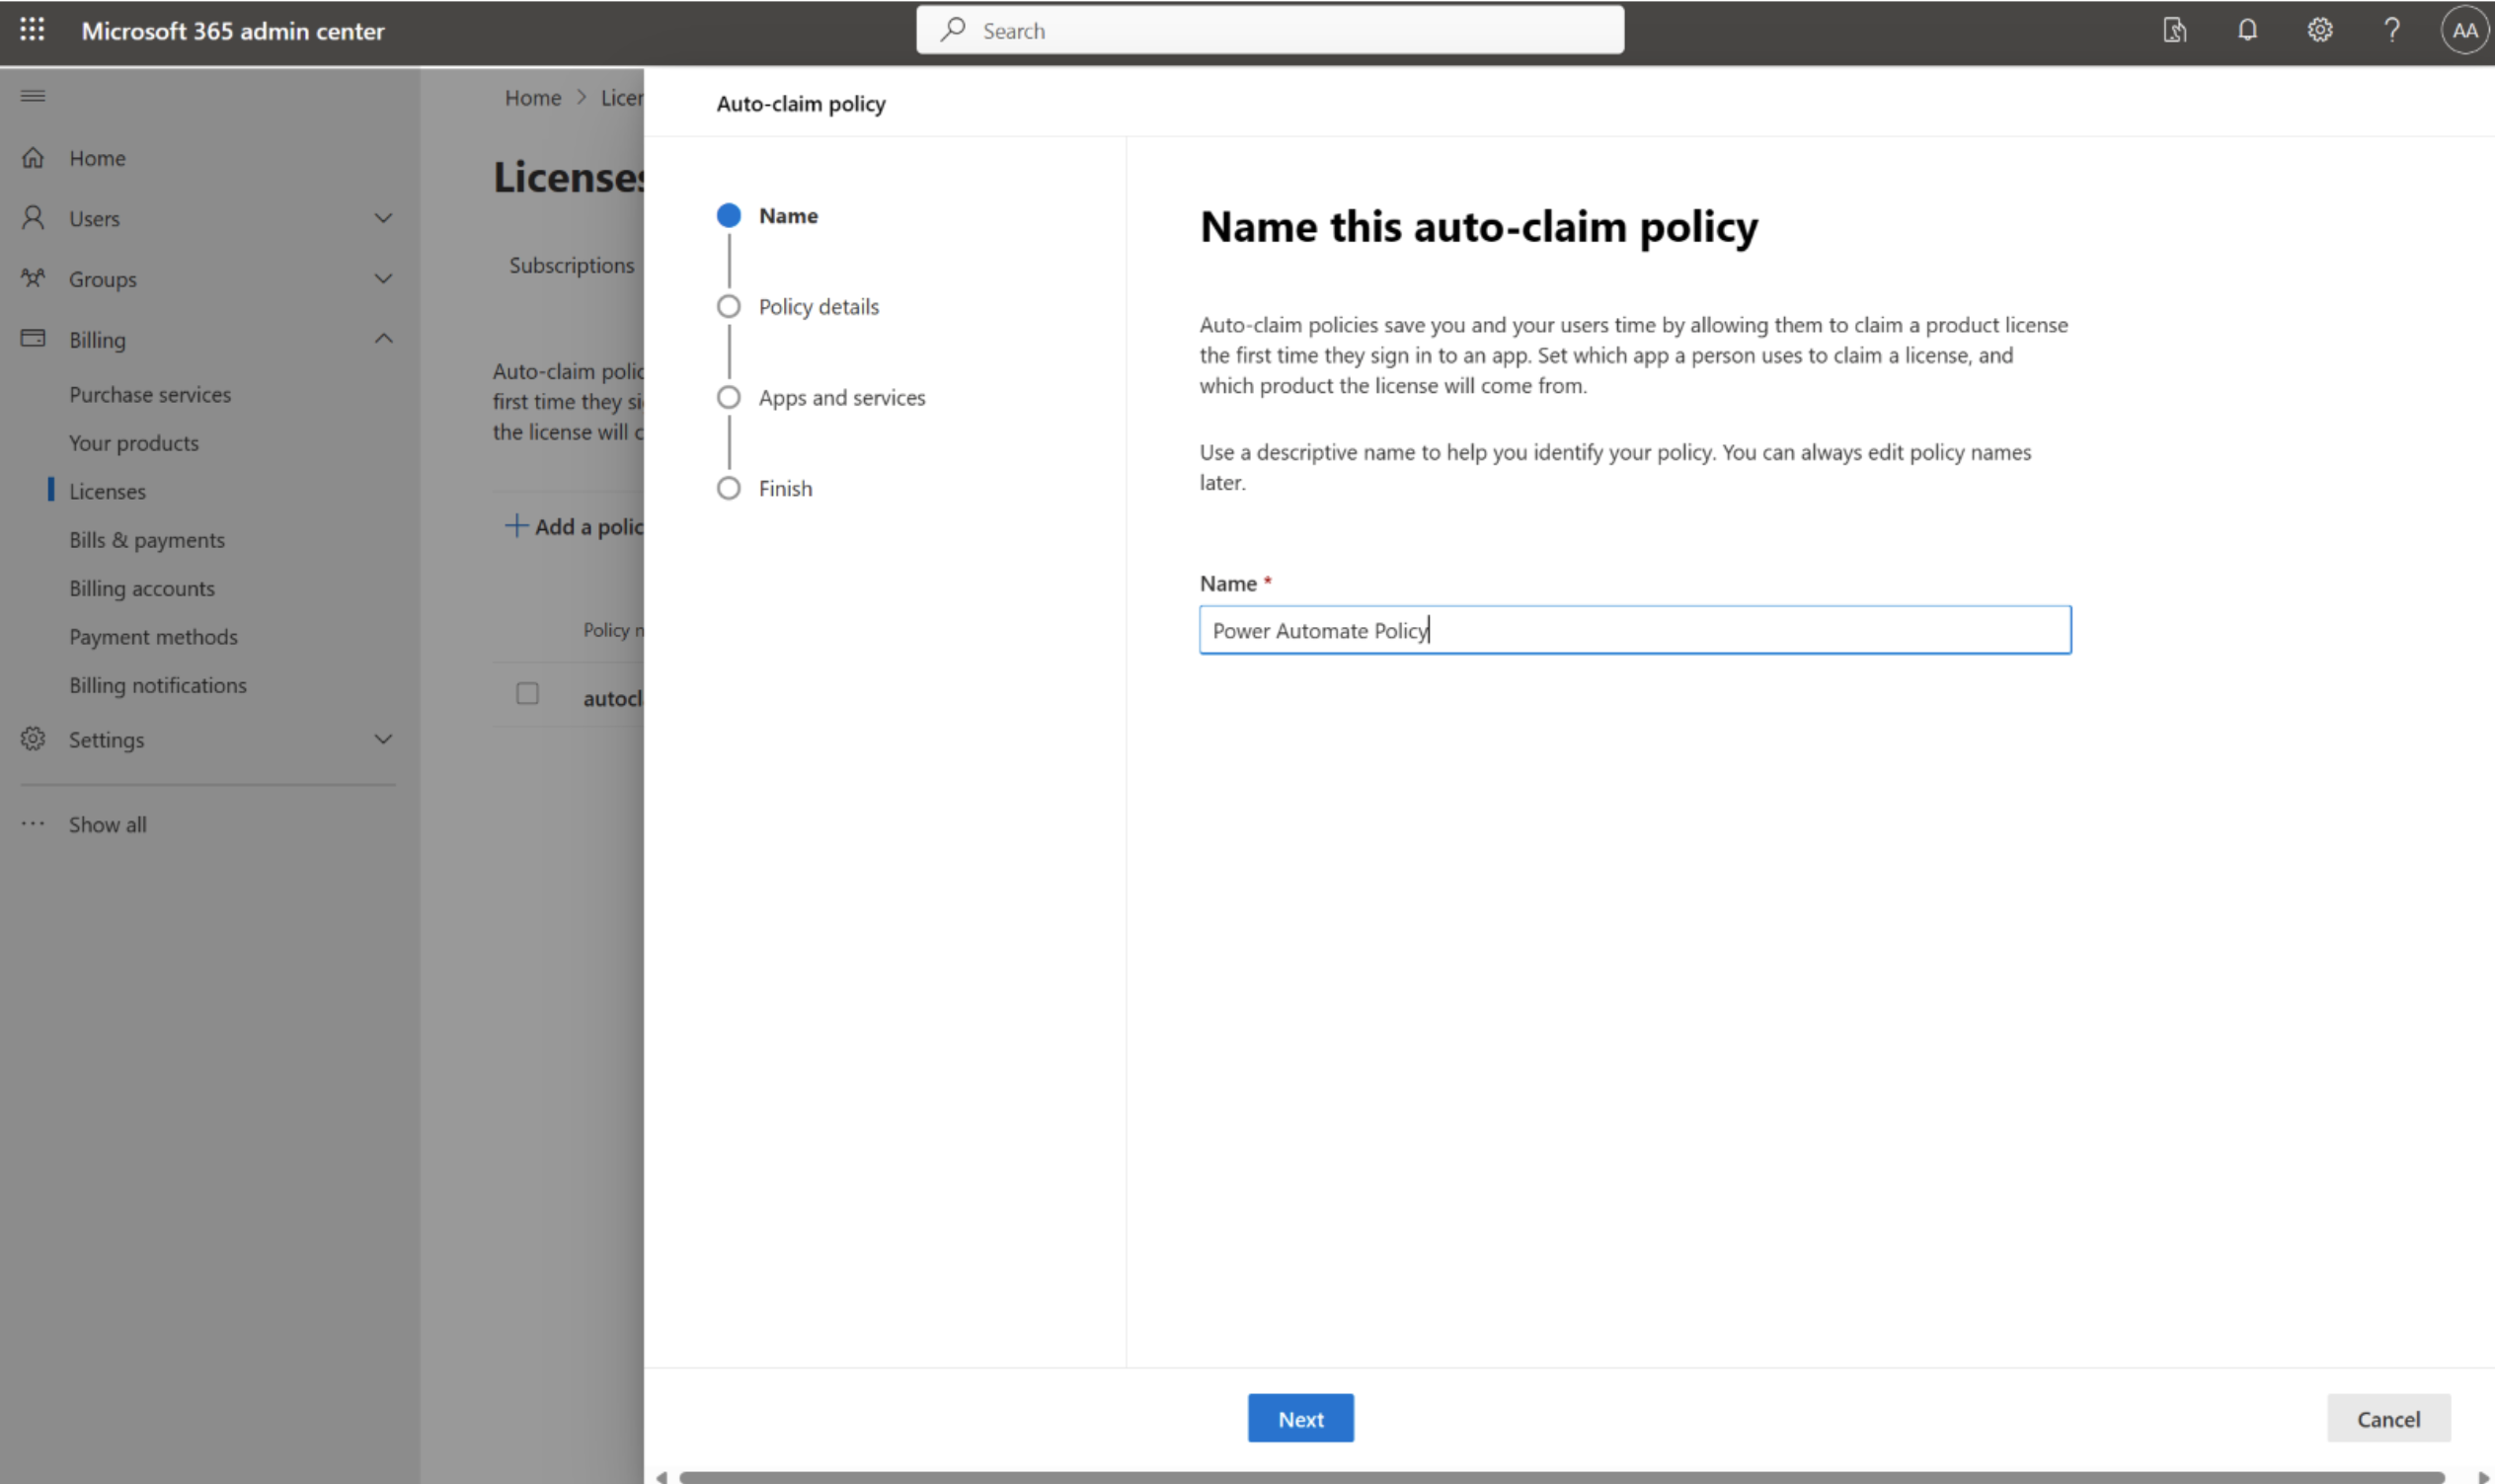 Input name for the auto-claim policy